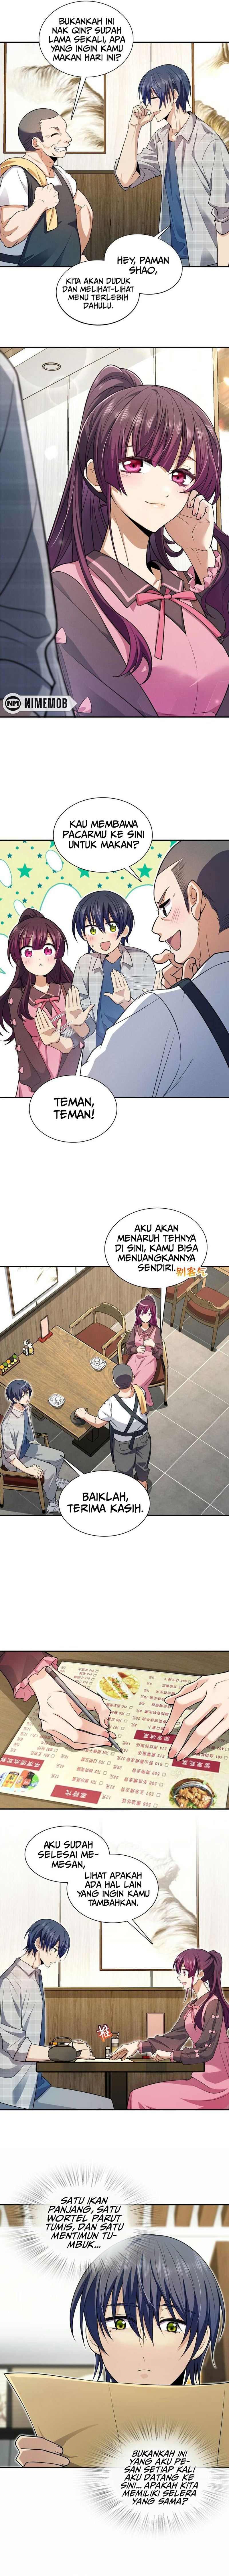 Please Behave, My Wife Chapter 3